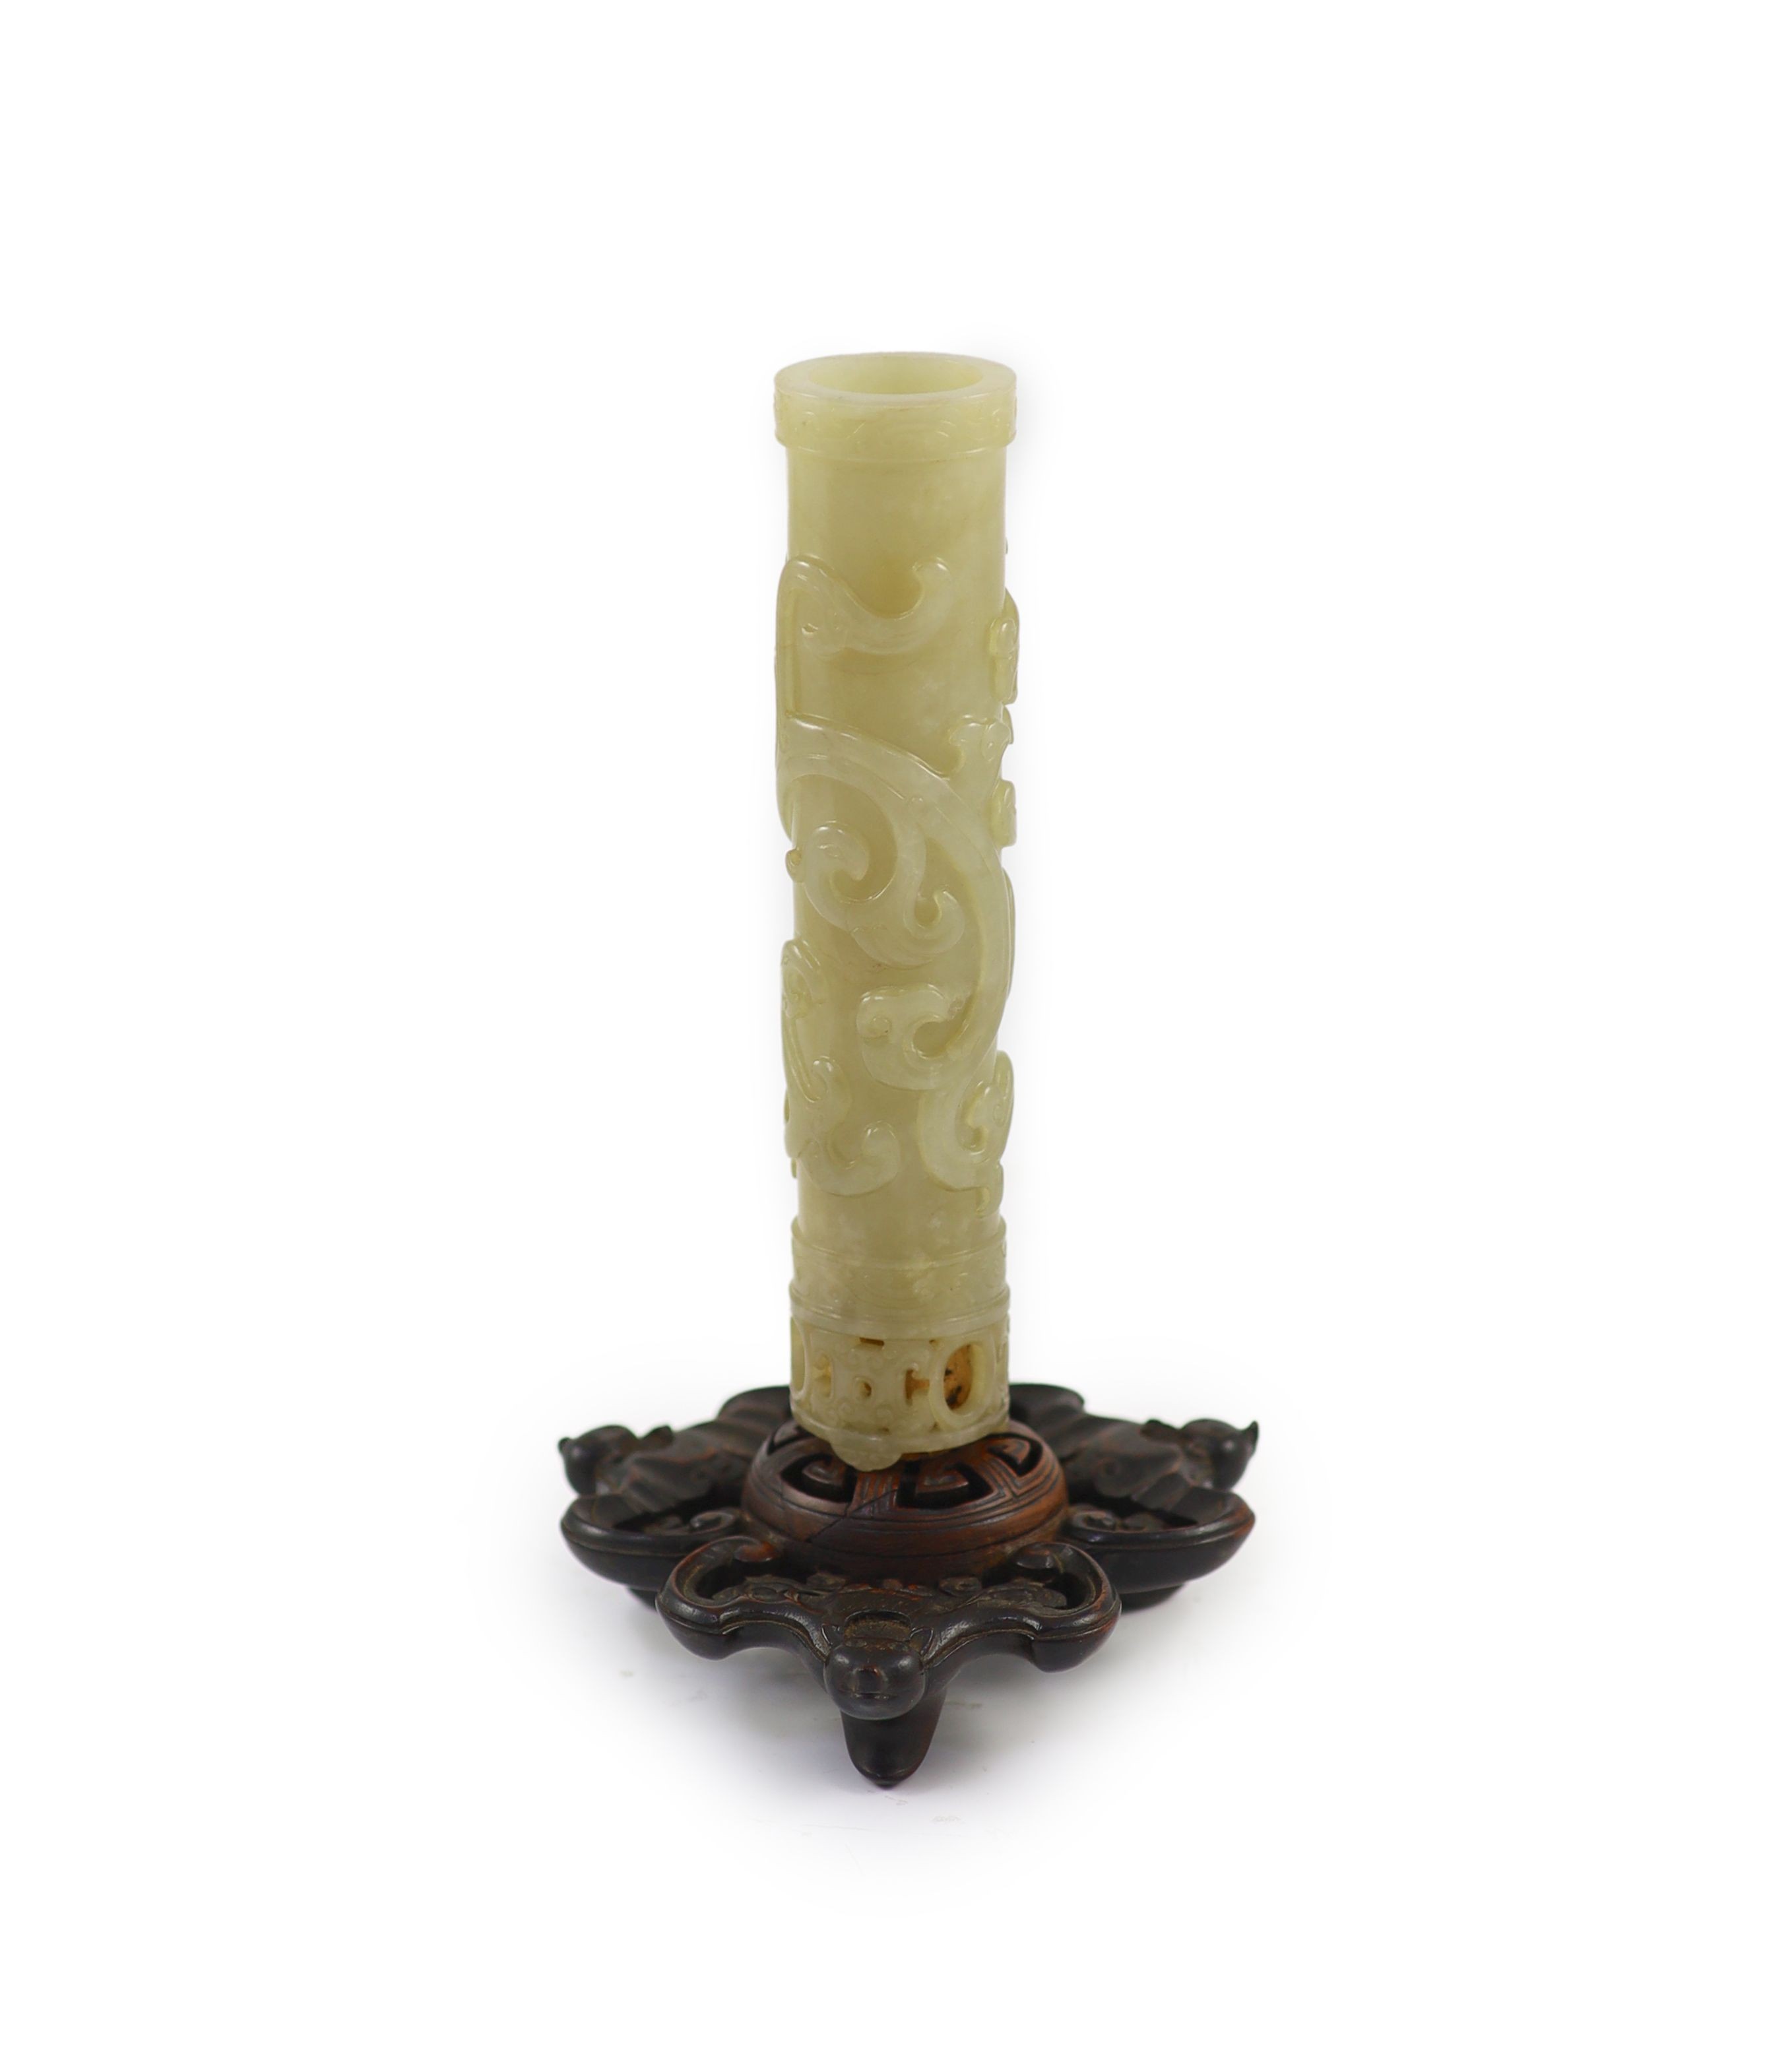 A Chinese celadon jade 'phoenix' cylindrical incense holder, 18th/19th century, 16.7cm high, adapted wood stand